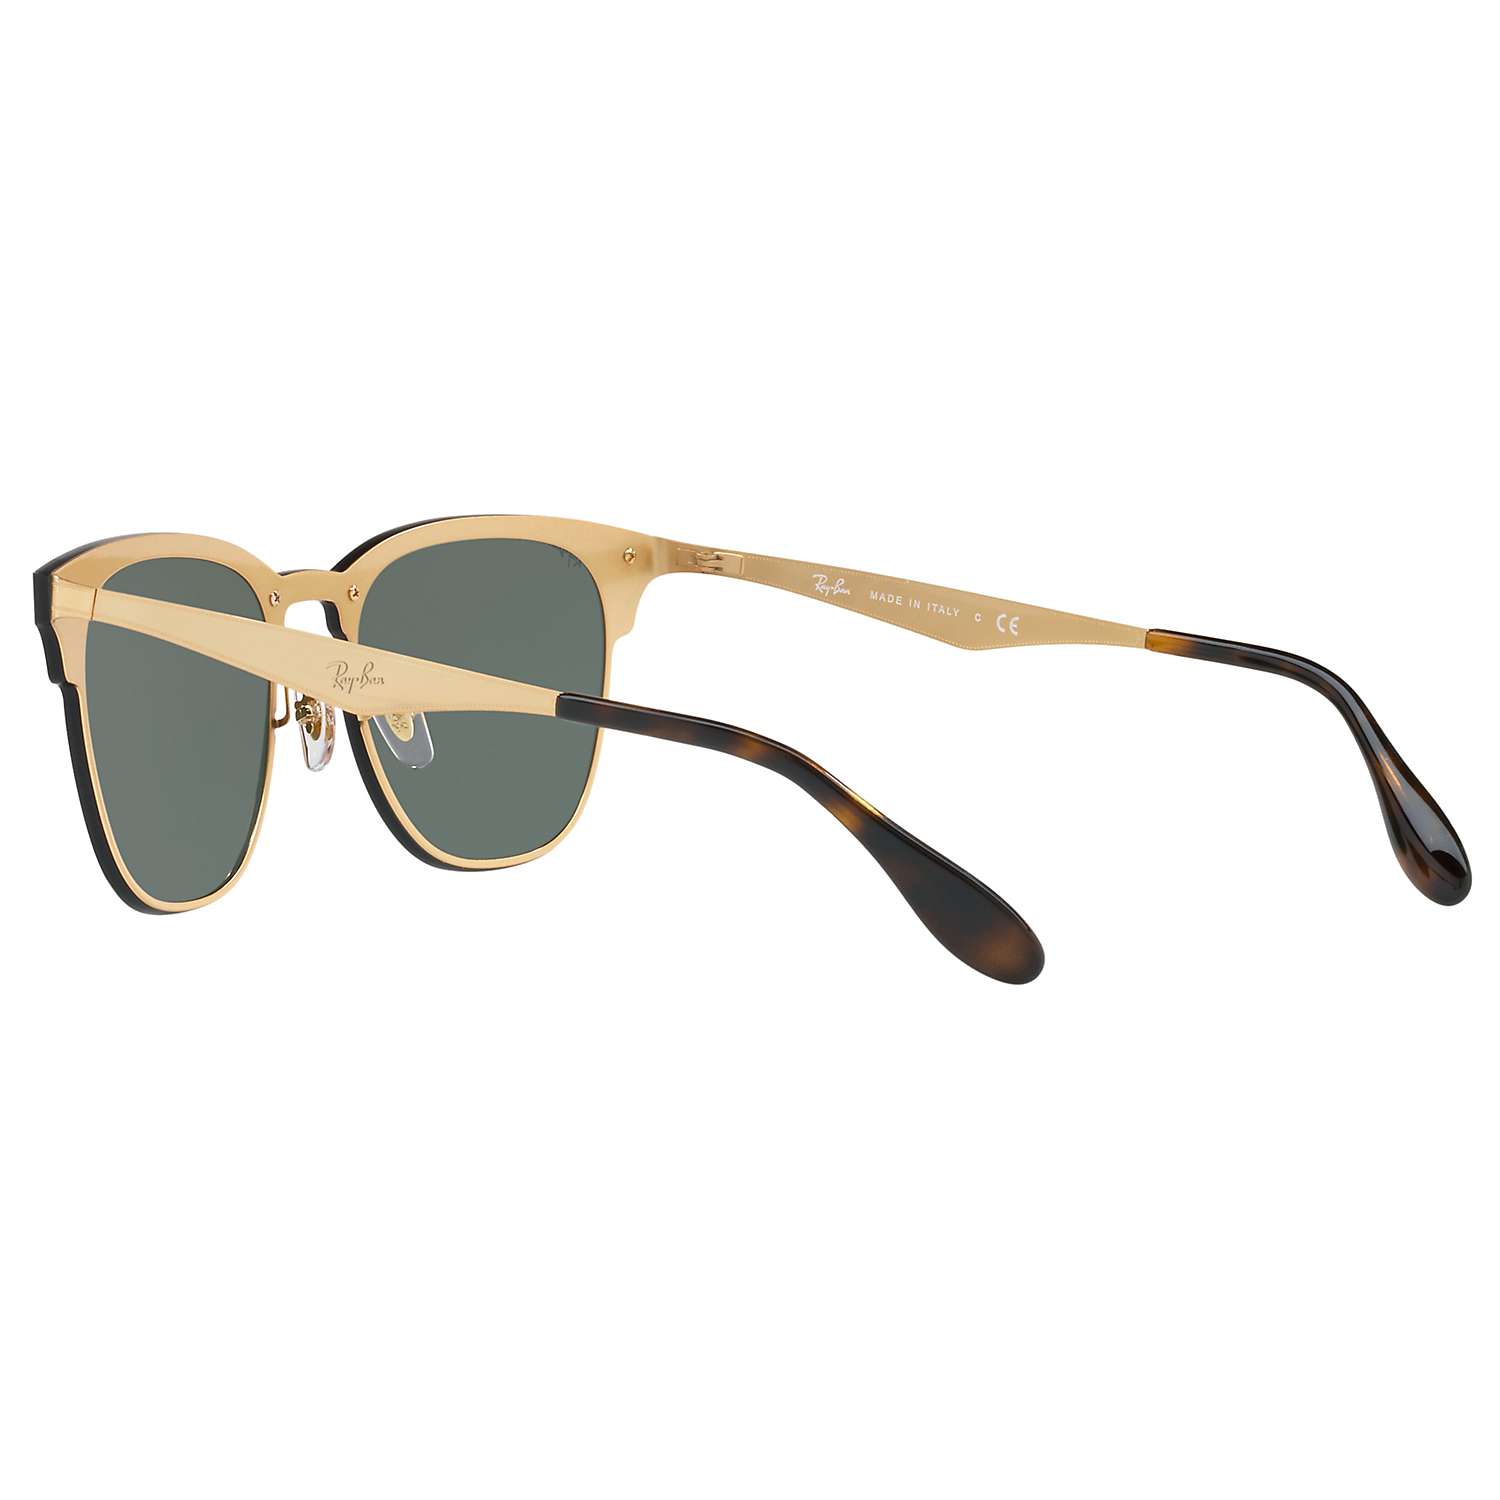 Buy Ray-Ban RB3576N Blaze Clubmaster Square Sunglasses Online at johnlewis.com